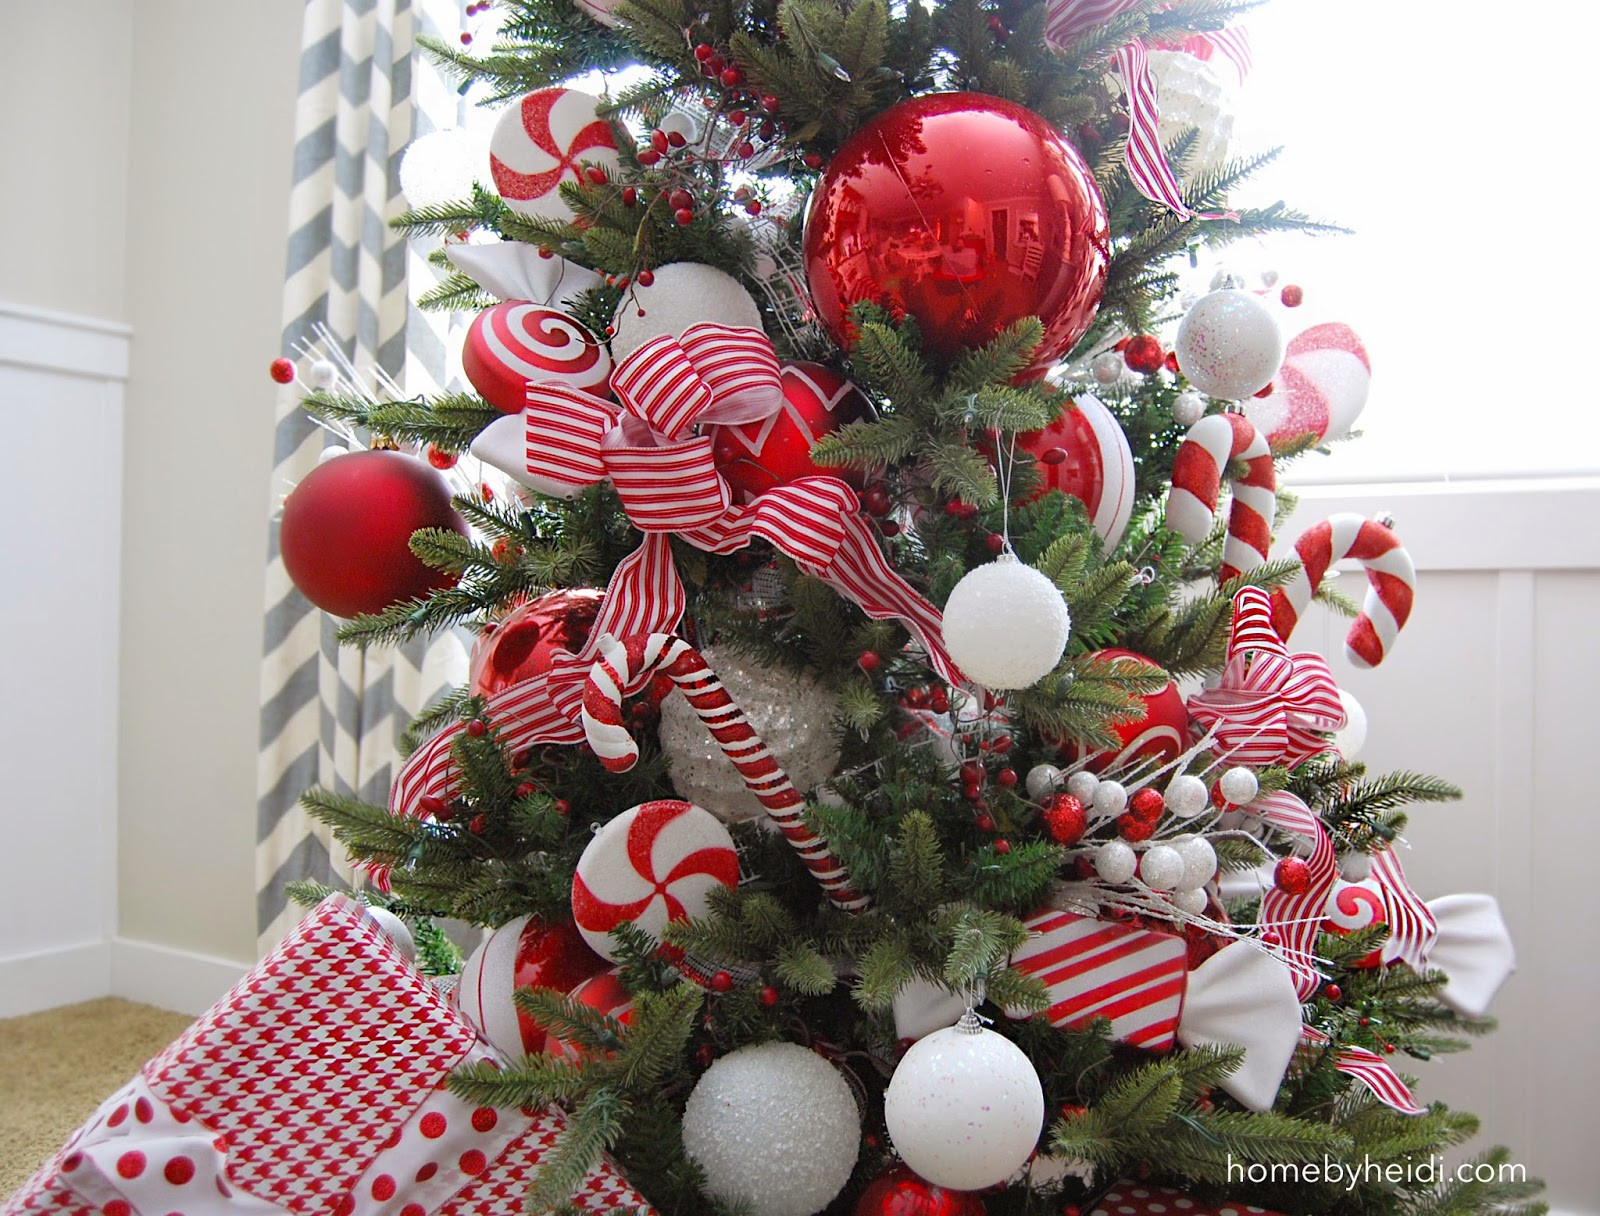 Candy Cane Christmas
 Home By Heidi Candy Cane Christmas Tree